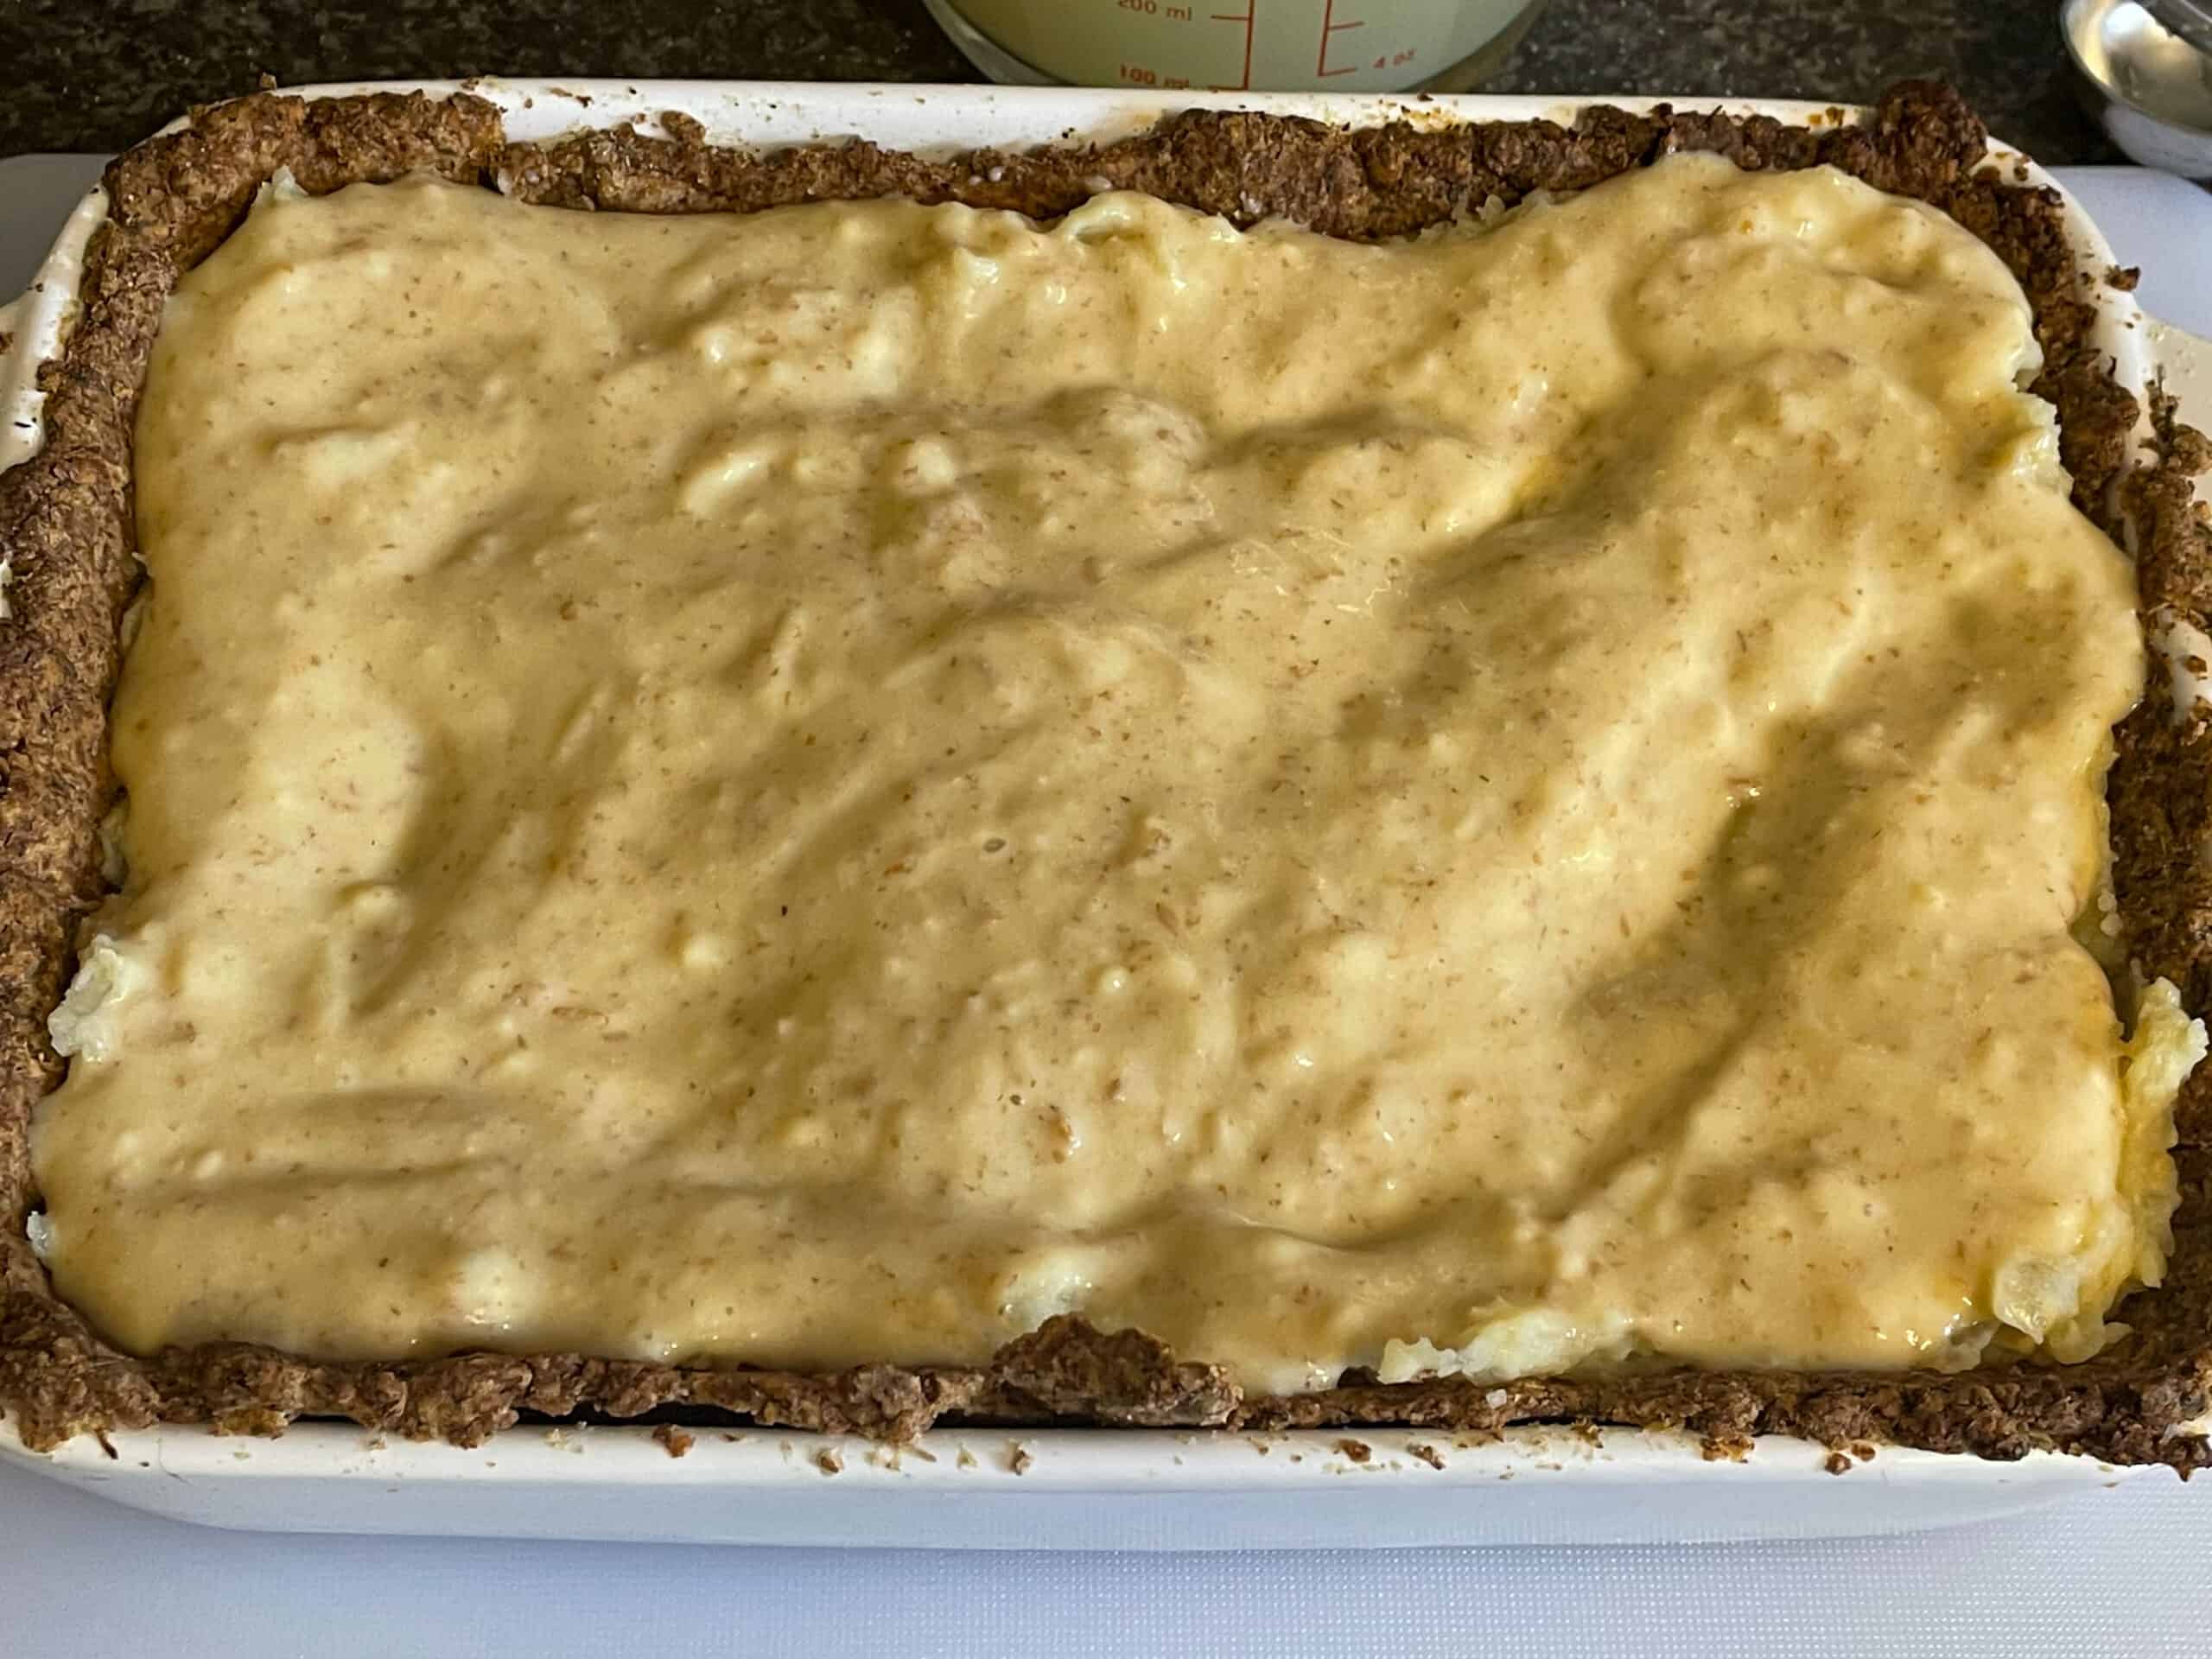 Potato filling added to baked pie crust and topped with cheese sauce.